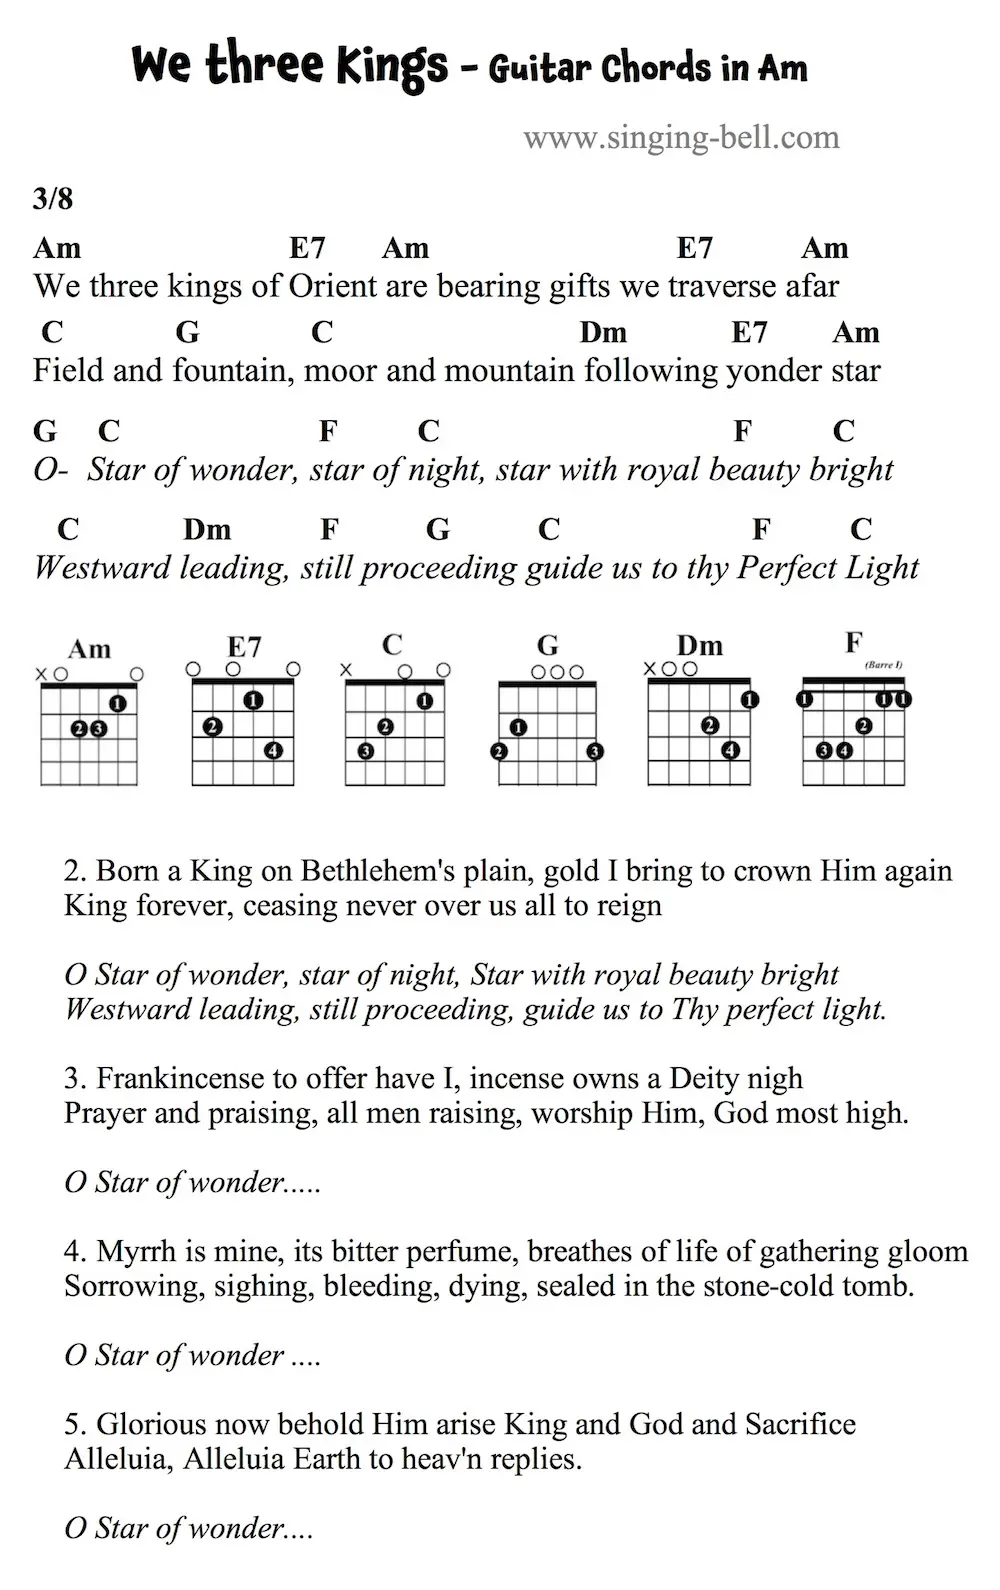 We three Kings Guitar Chords and Tabs in Am.